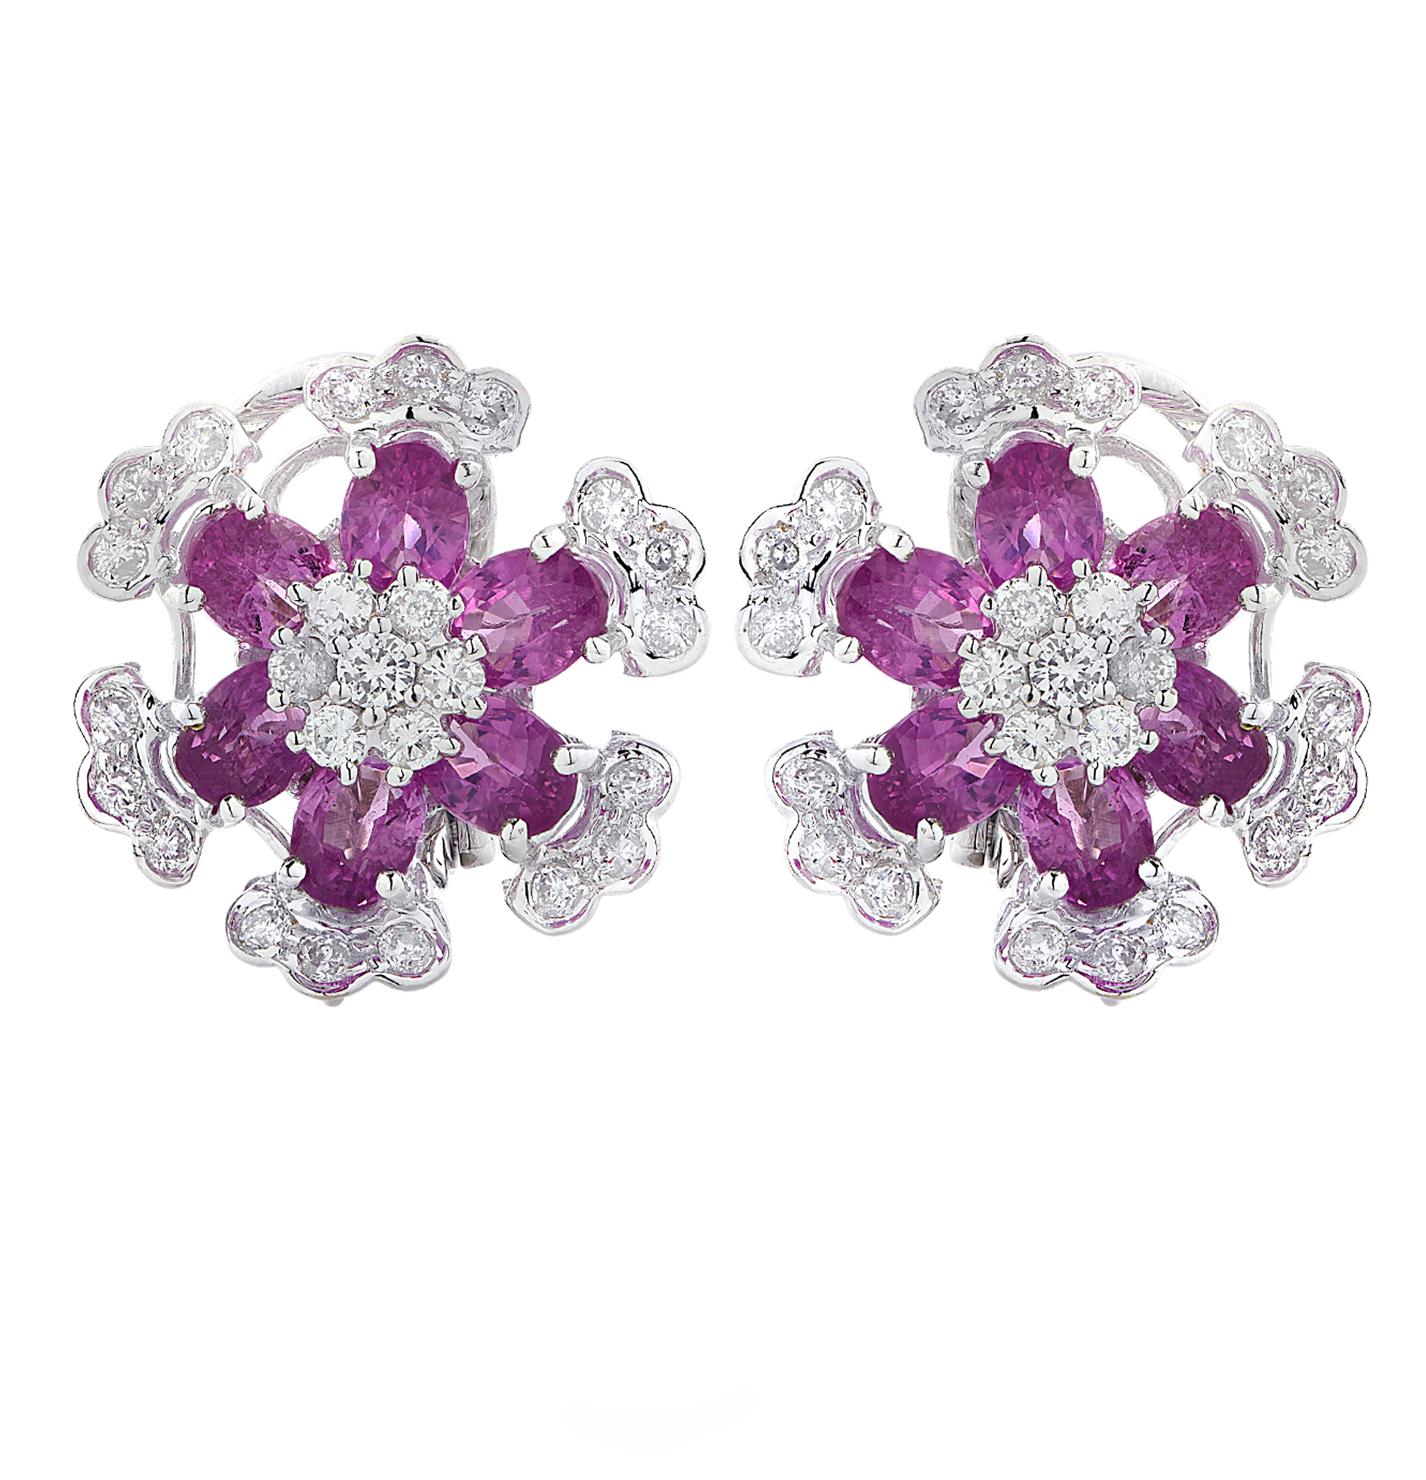 Enchanting earrings crafted in 18 karat white gold featuring 12 oval pink Sapphires weighing approximately 7.55 carats total and 50 round brilliant cut diamonds weighing approximately 1.64 carats total, G-H color, VS-SI clarity. Pink Sapphires are